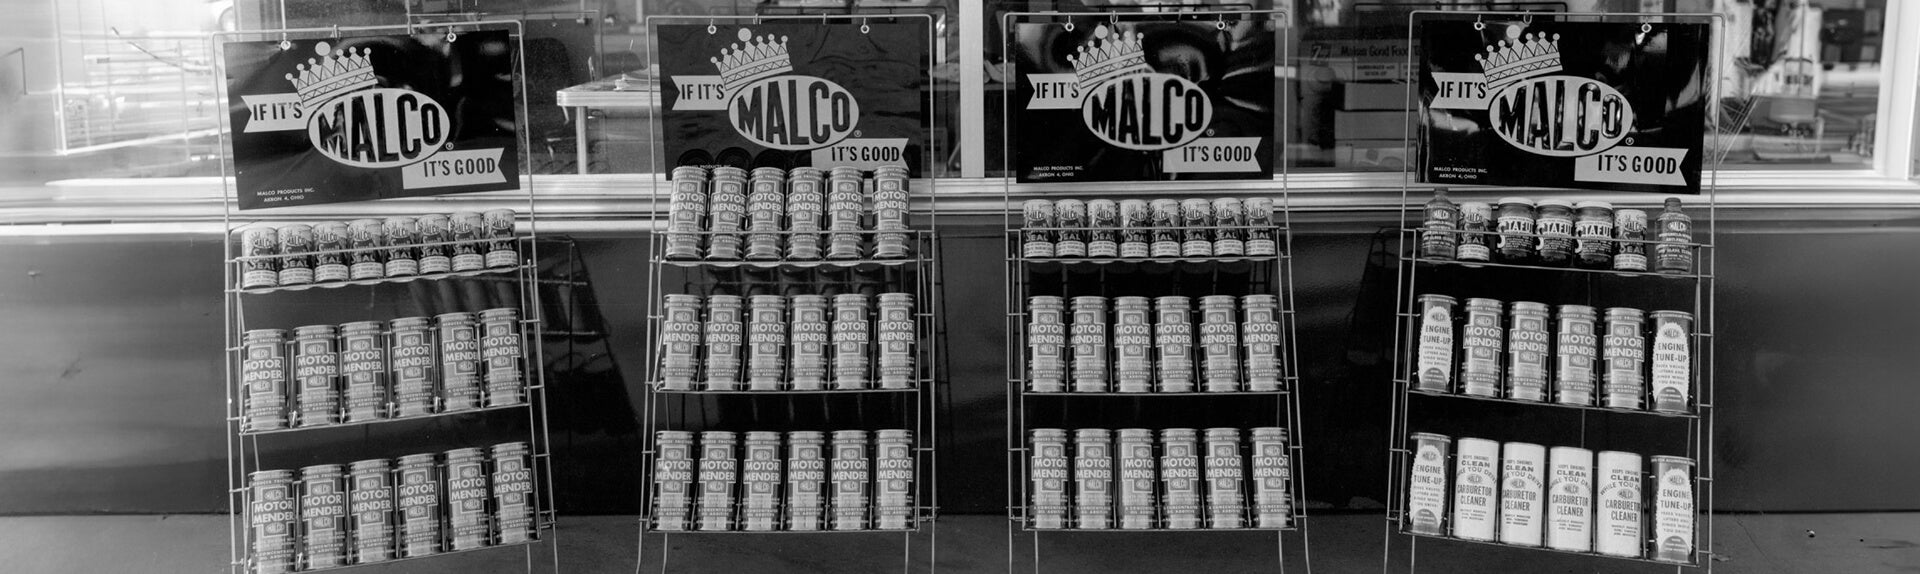 A row of MALCO cans on display